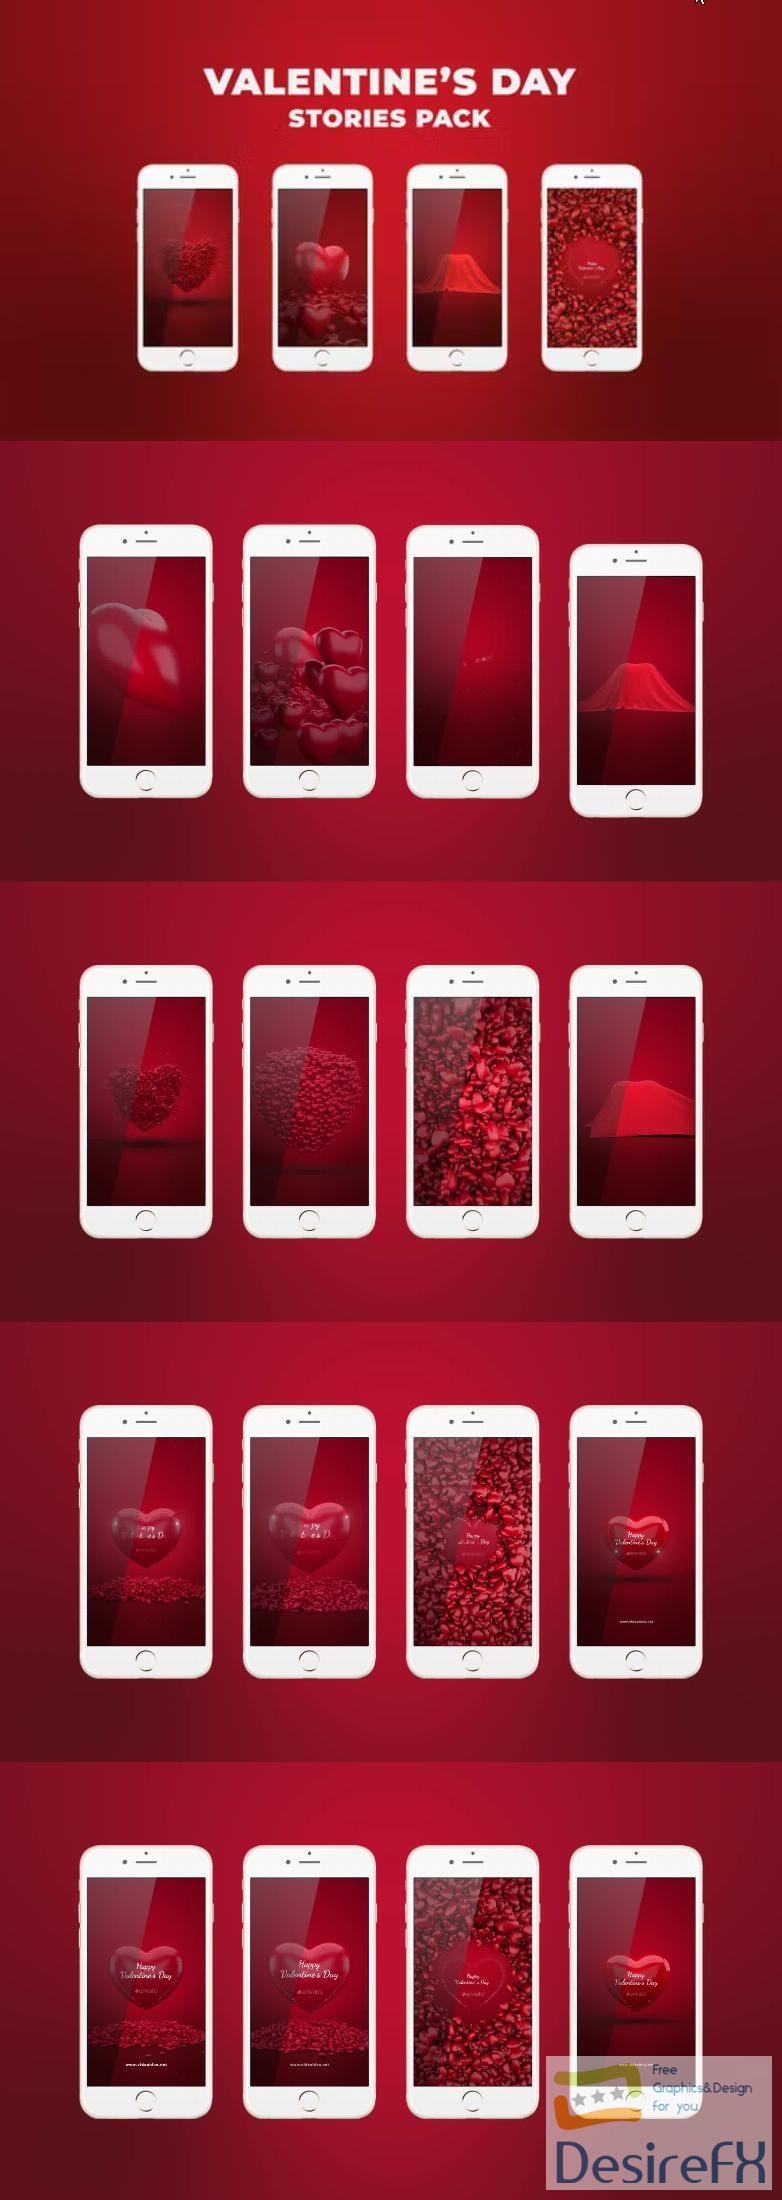 Videohive Valentines Day Story Pack 43255550